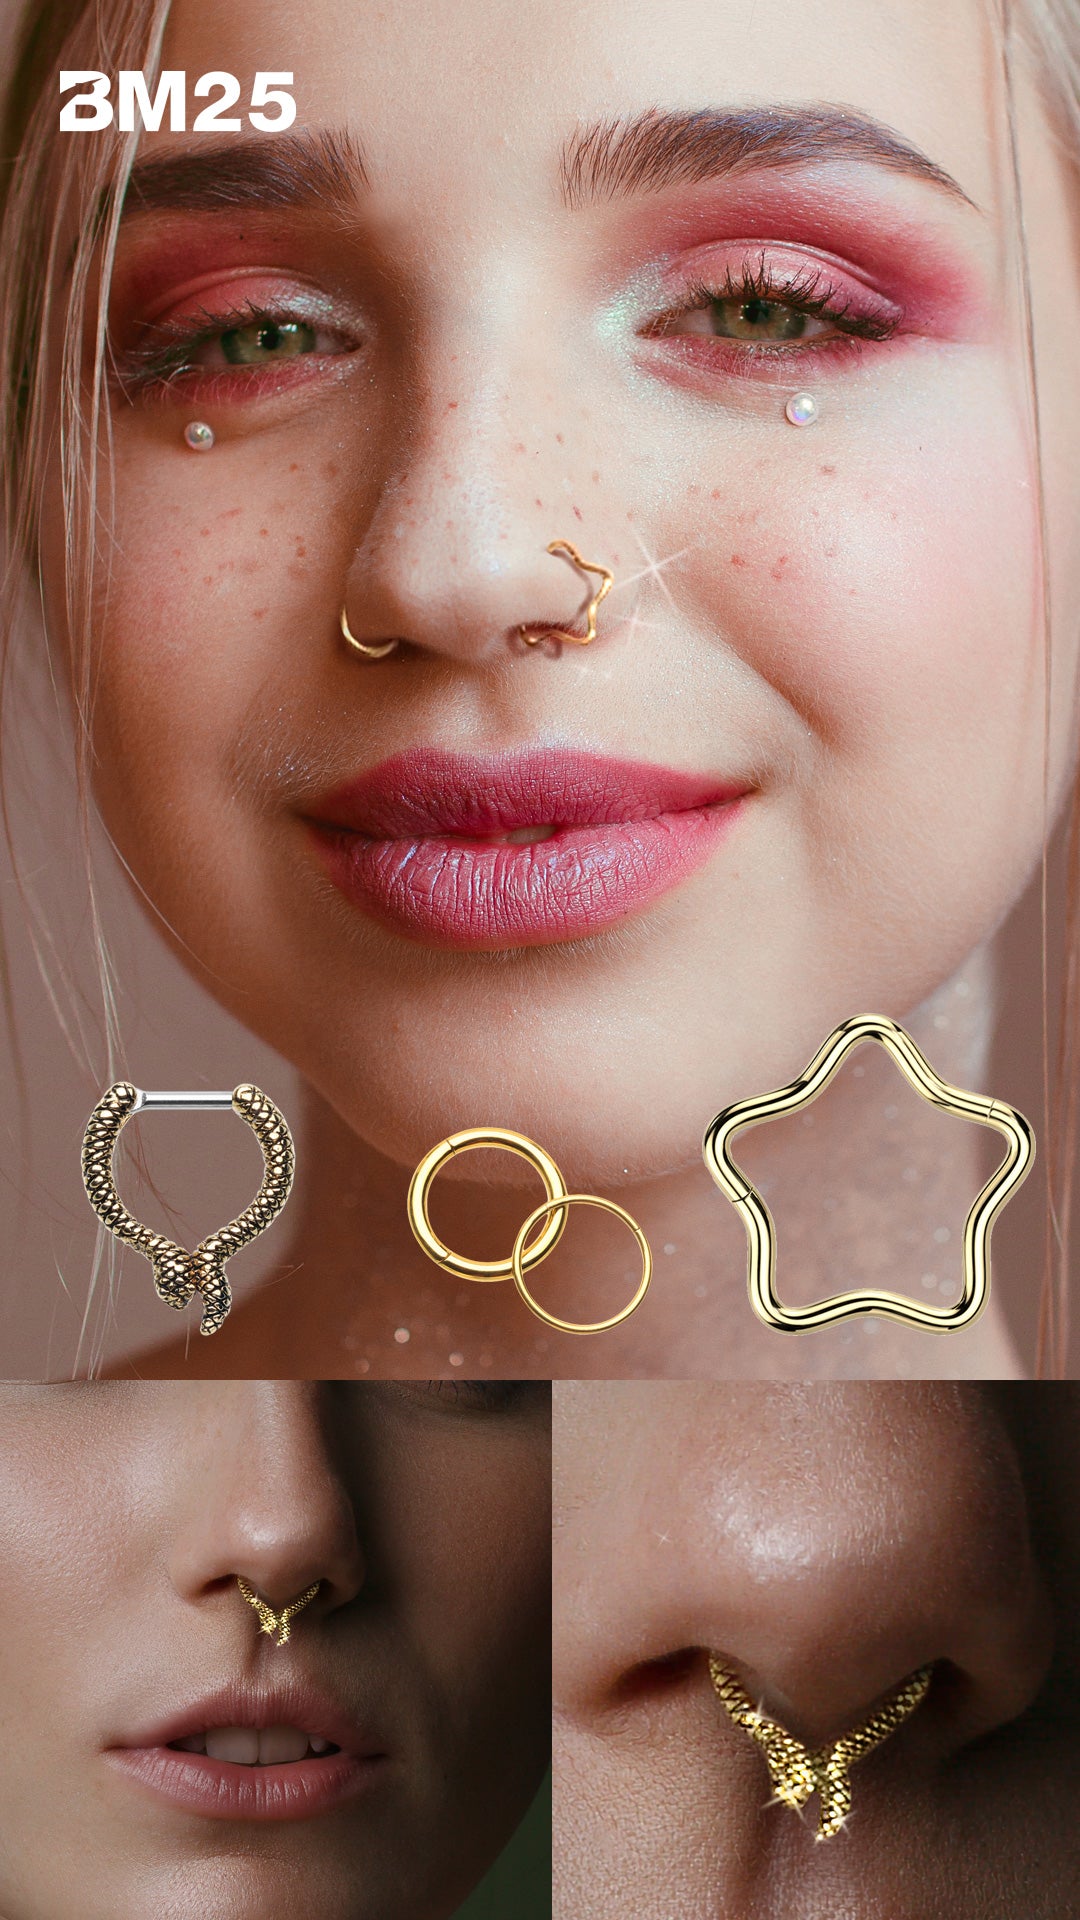 Young blonde woman wearing a nose hoop on one side and the bm25 star clicker body jewelry ring on the other side. Underneath the photo is someone wearing our Staff Pick Serpent Septum Clicker